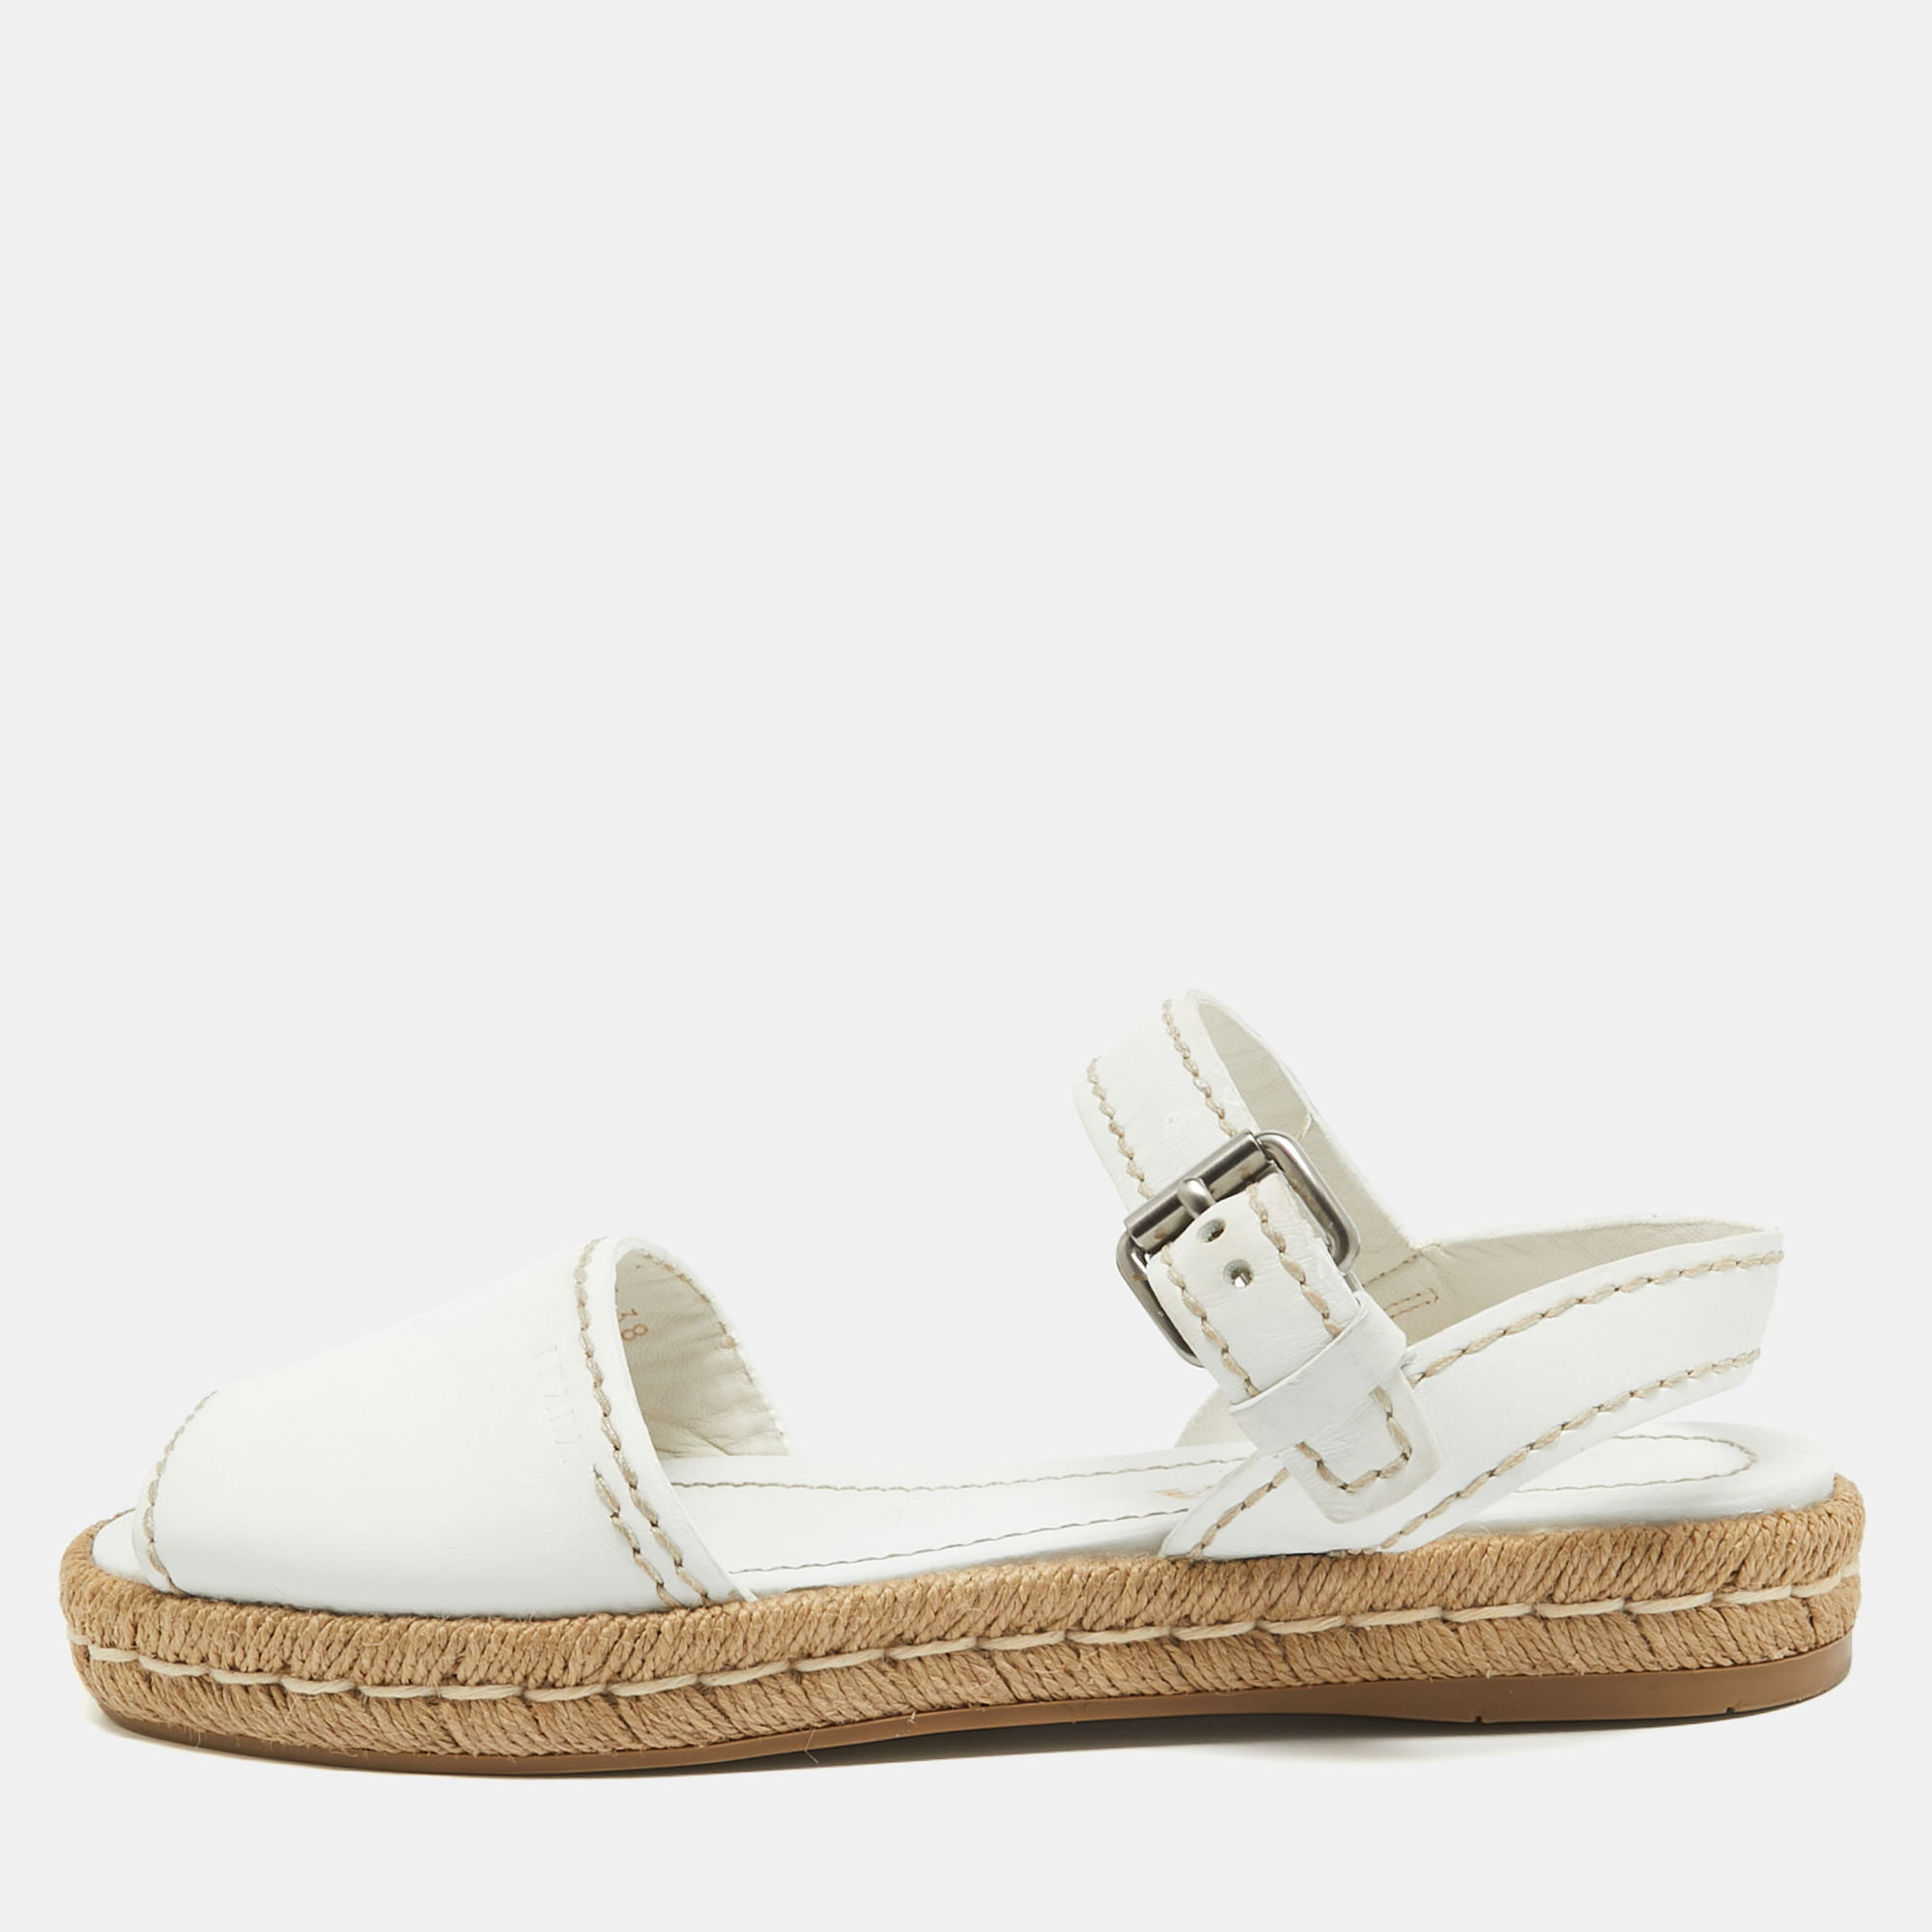 Pre-owned Prada White Leather Slingback Espadrille Sandals Size 38